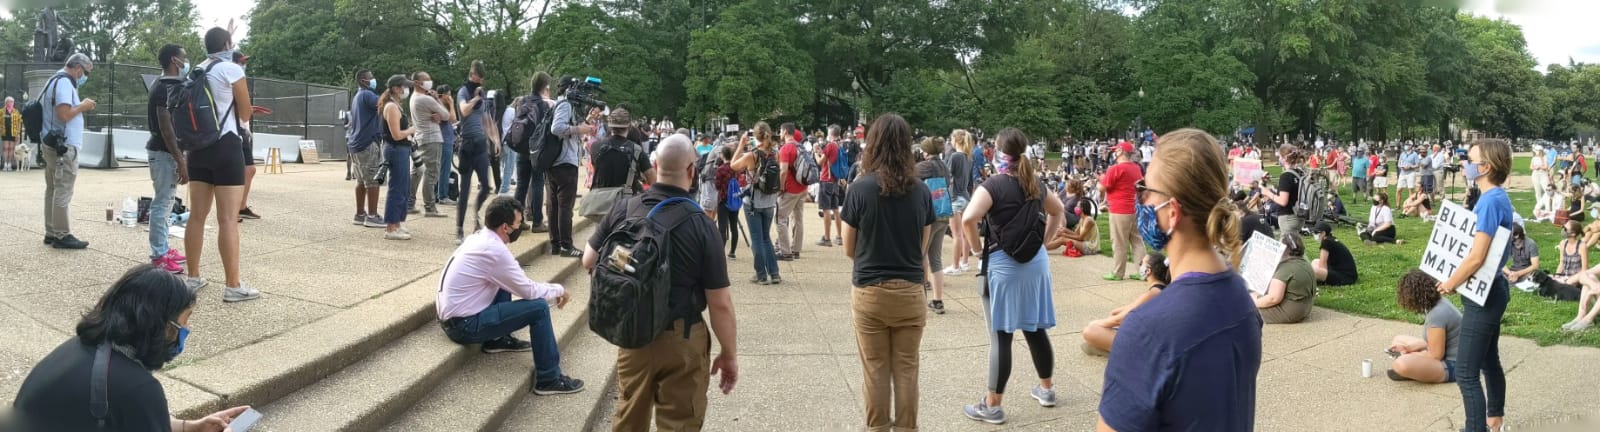 Crowds gather at a statue protest. Photo by Christopher Bedford/The Federalist.